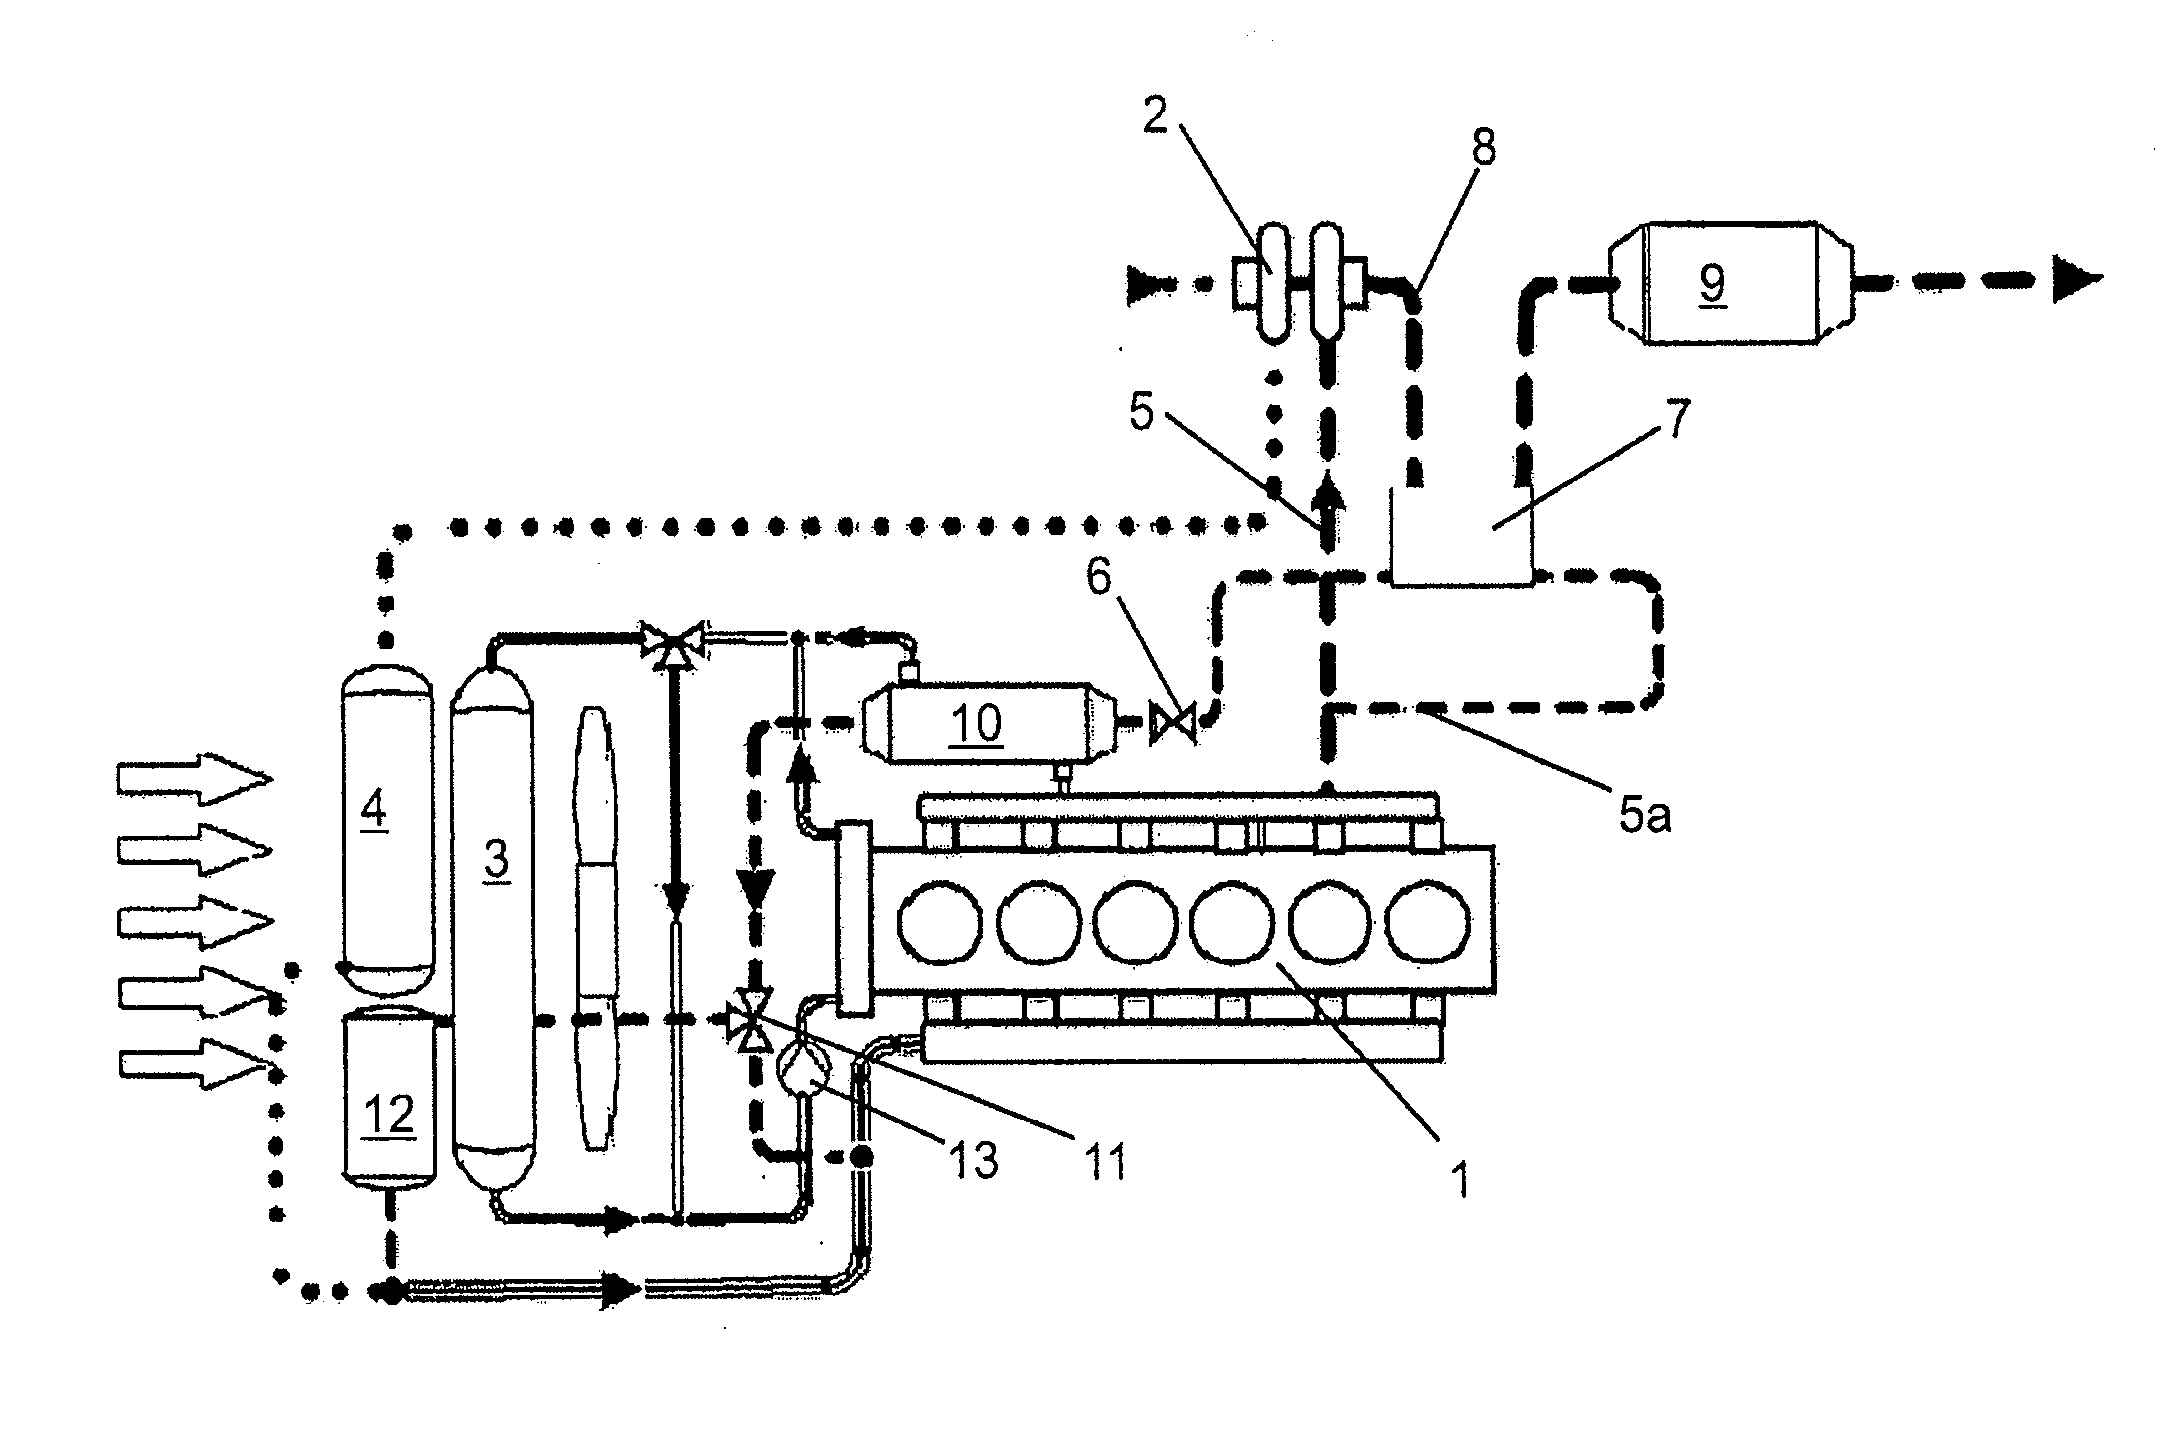 Device and method for recirculating exhaust gas in an internal combustion engine